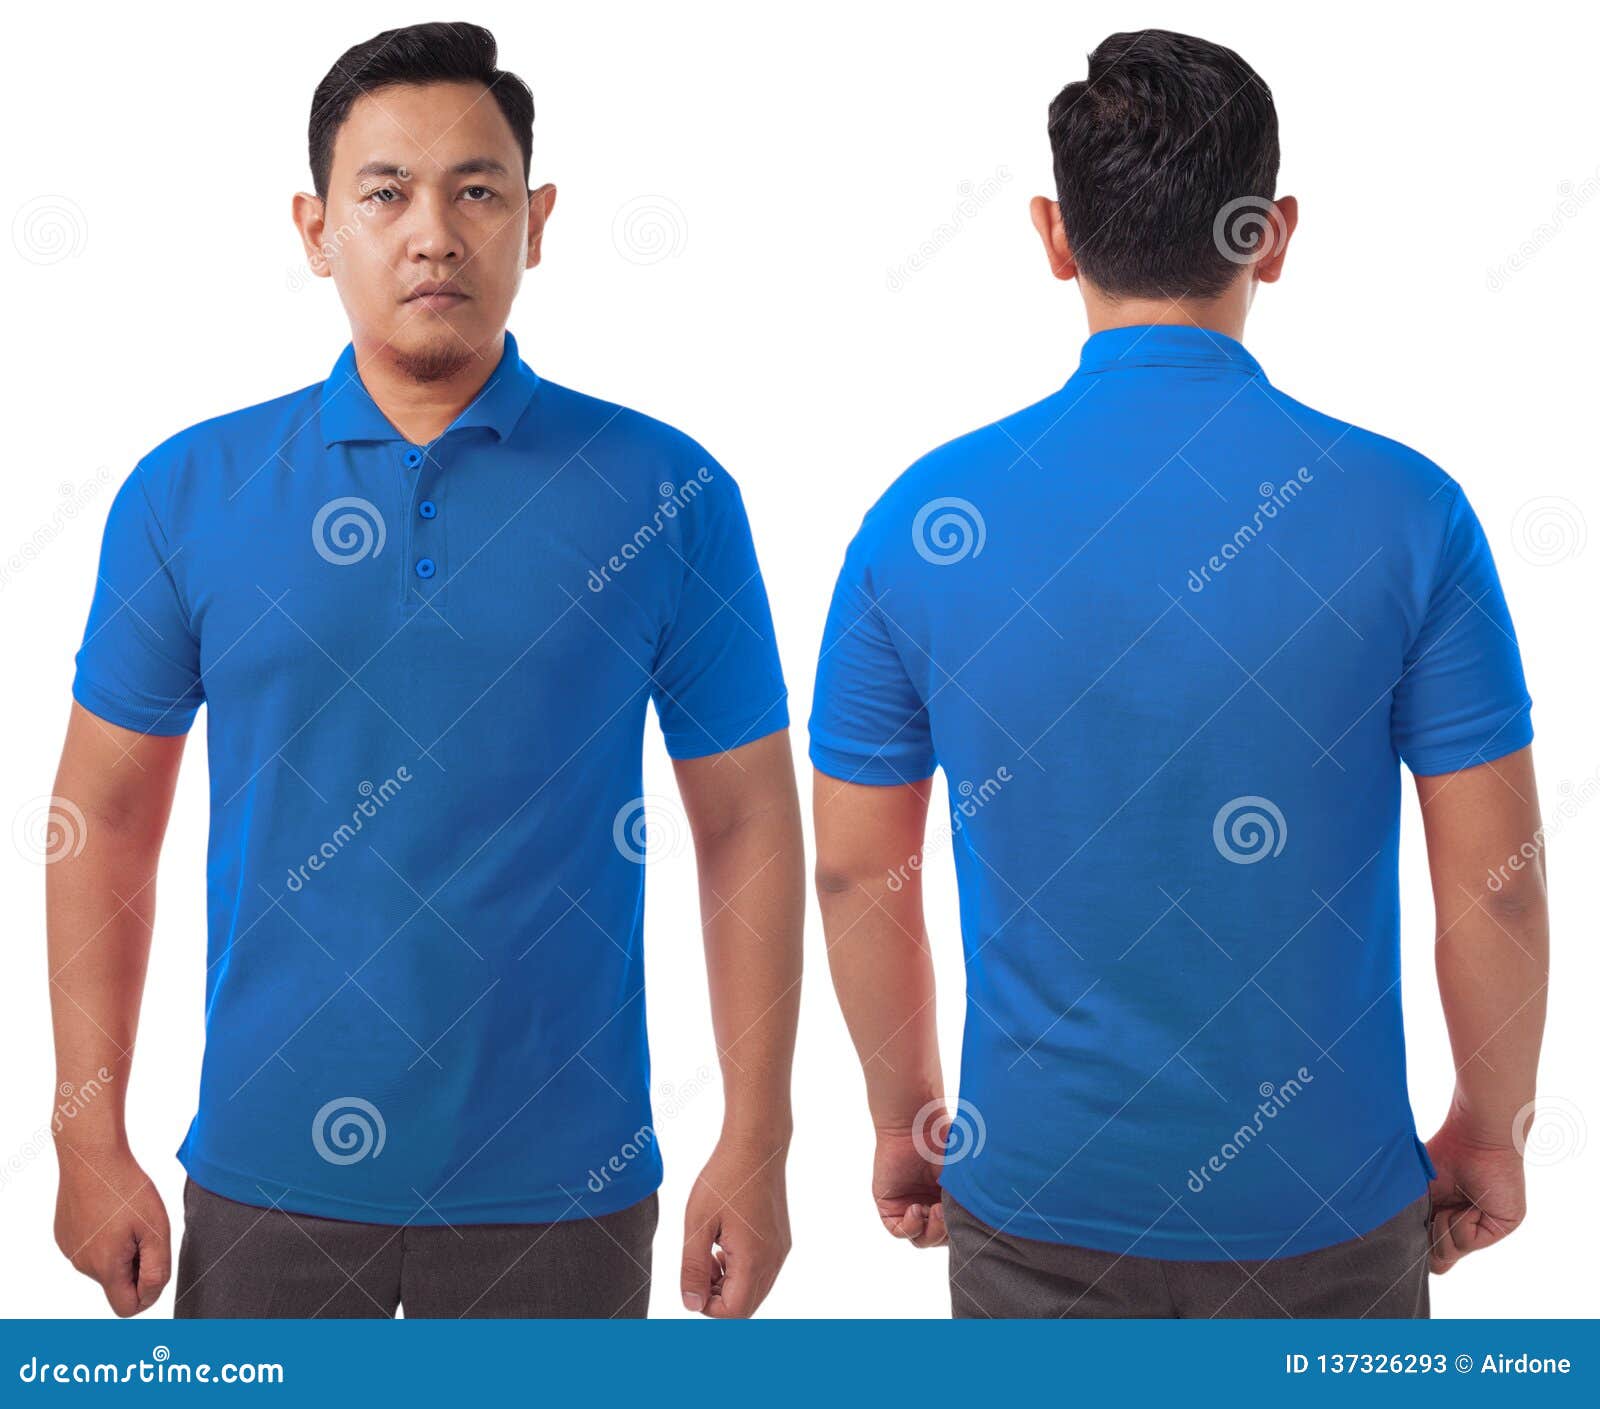 Blue Collared Shirt Design Template Stock Image - Image of clothing ...